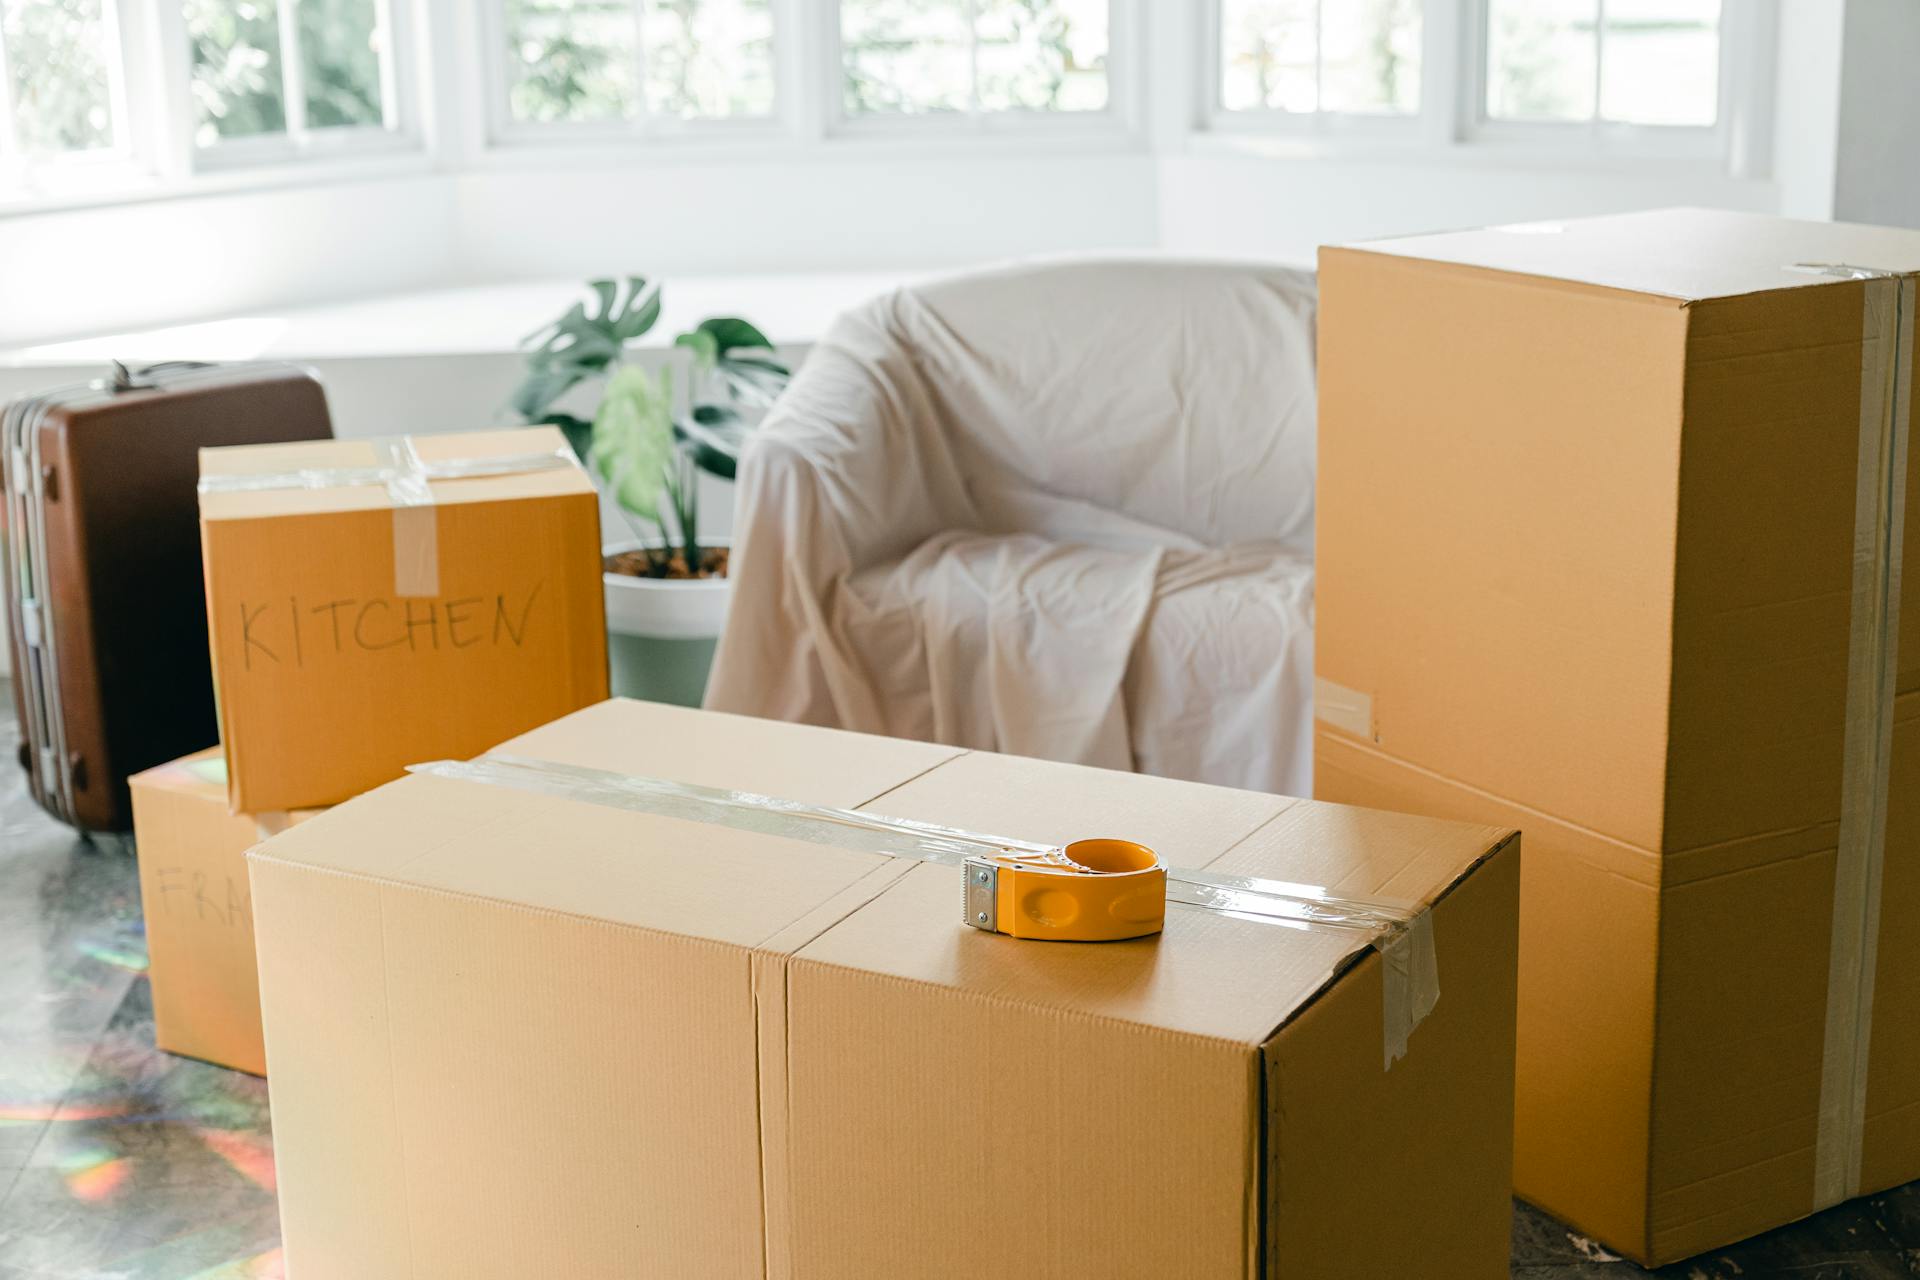 Packed boxes for moving house | Source: Pexels